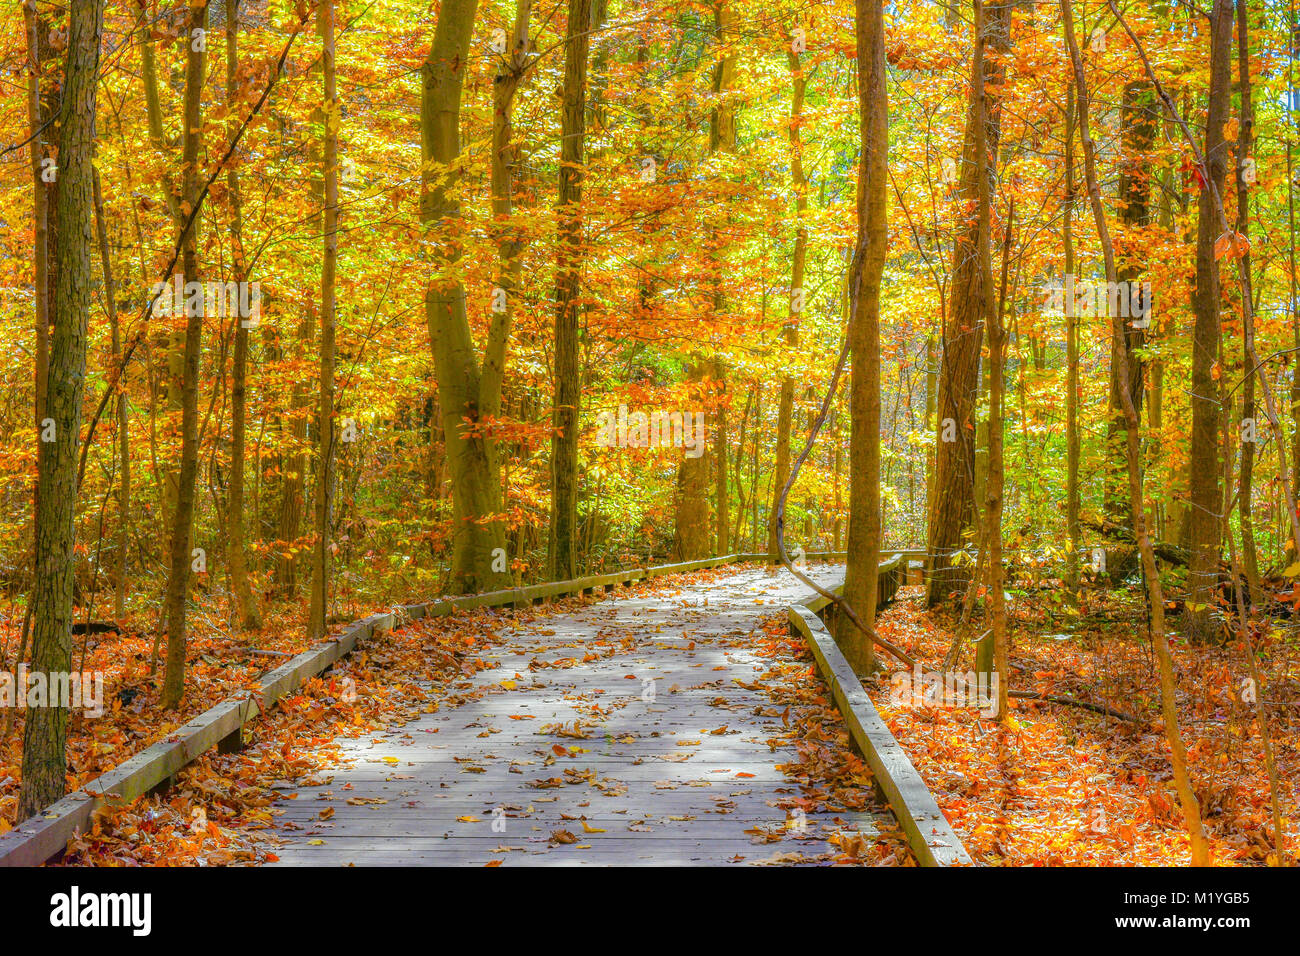 A wooden nature trail passing through the woods at the peak of fall.  Fallen leaves blanket the area as the sun illuminates the trail ahead. Stock Photo